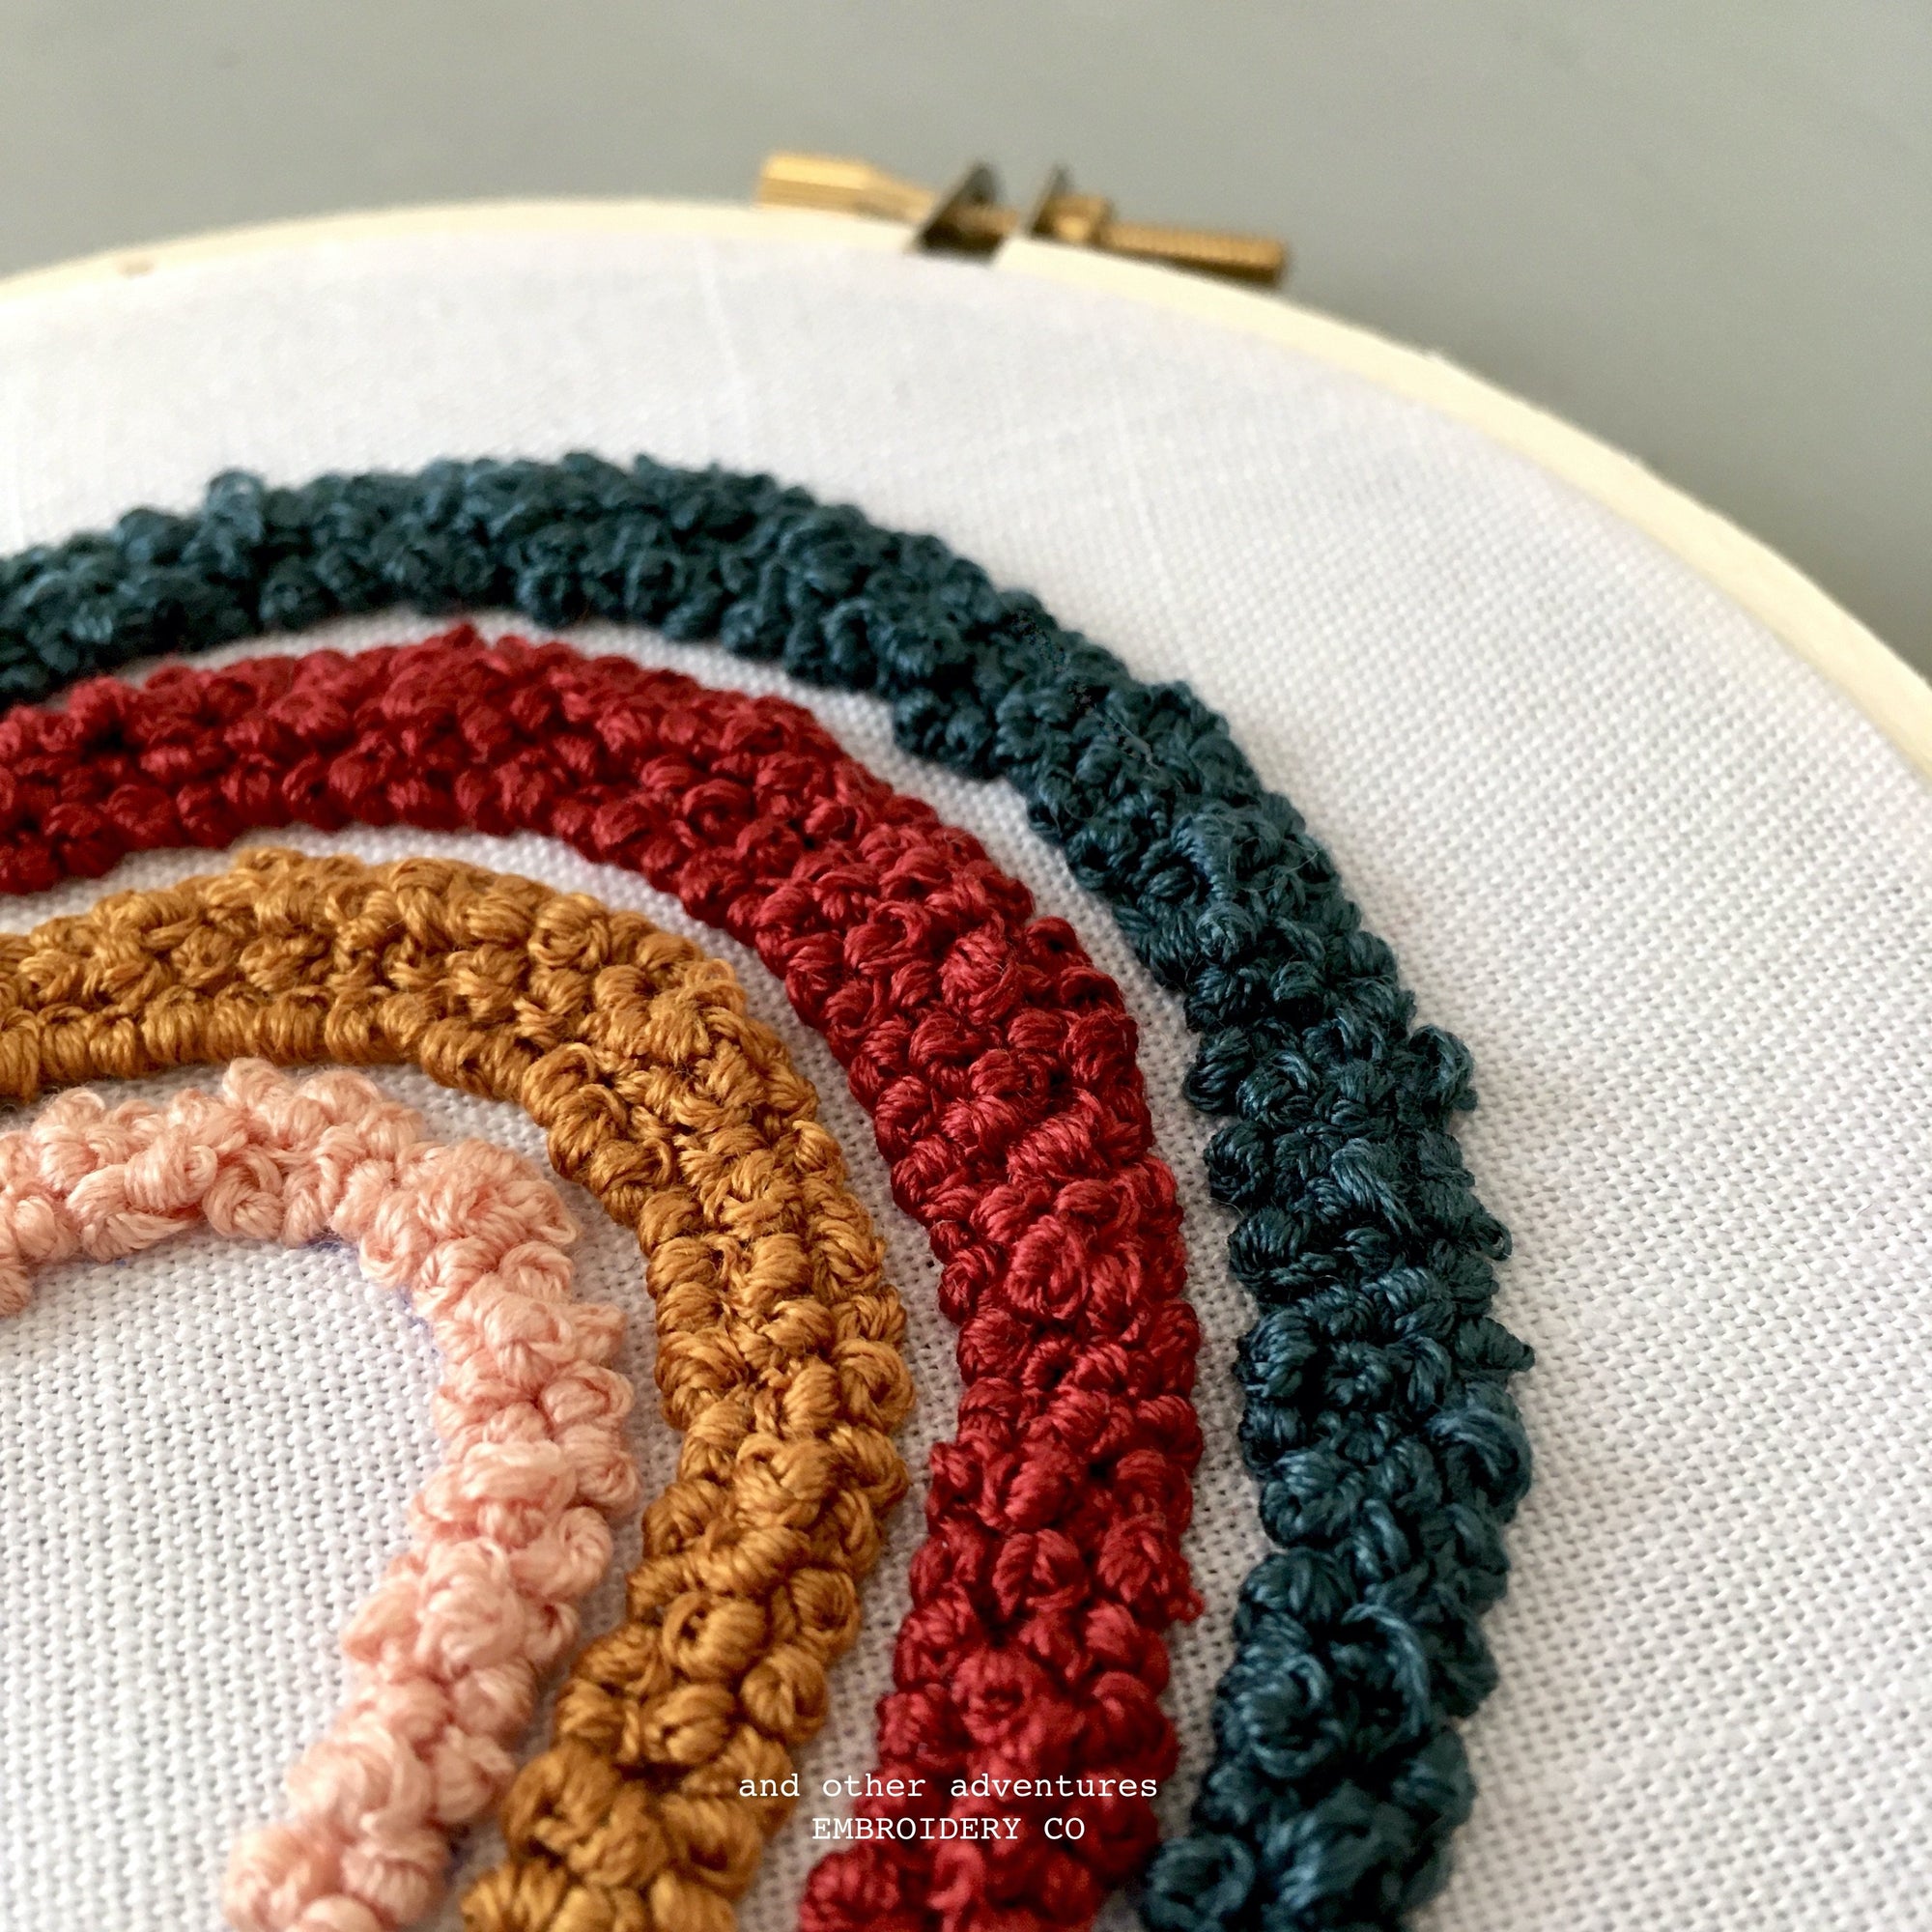 Rainbow DIY Punch Embroidery Kit